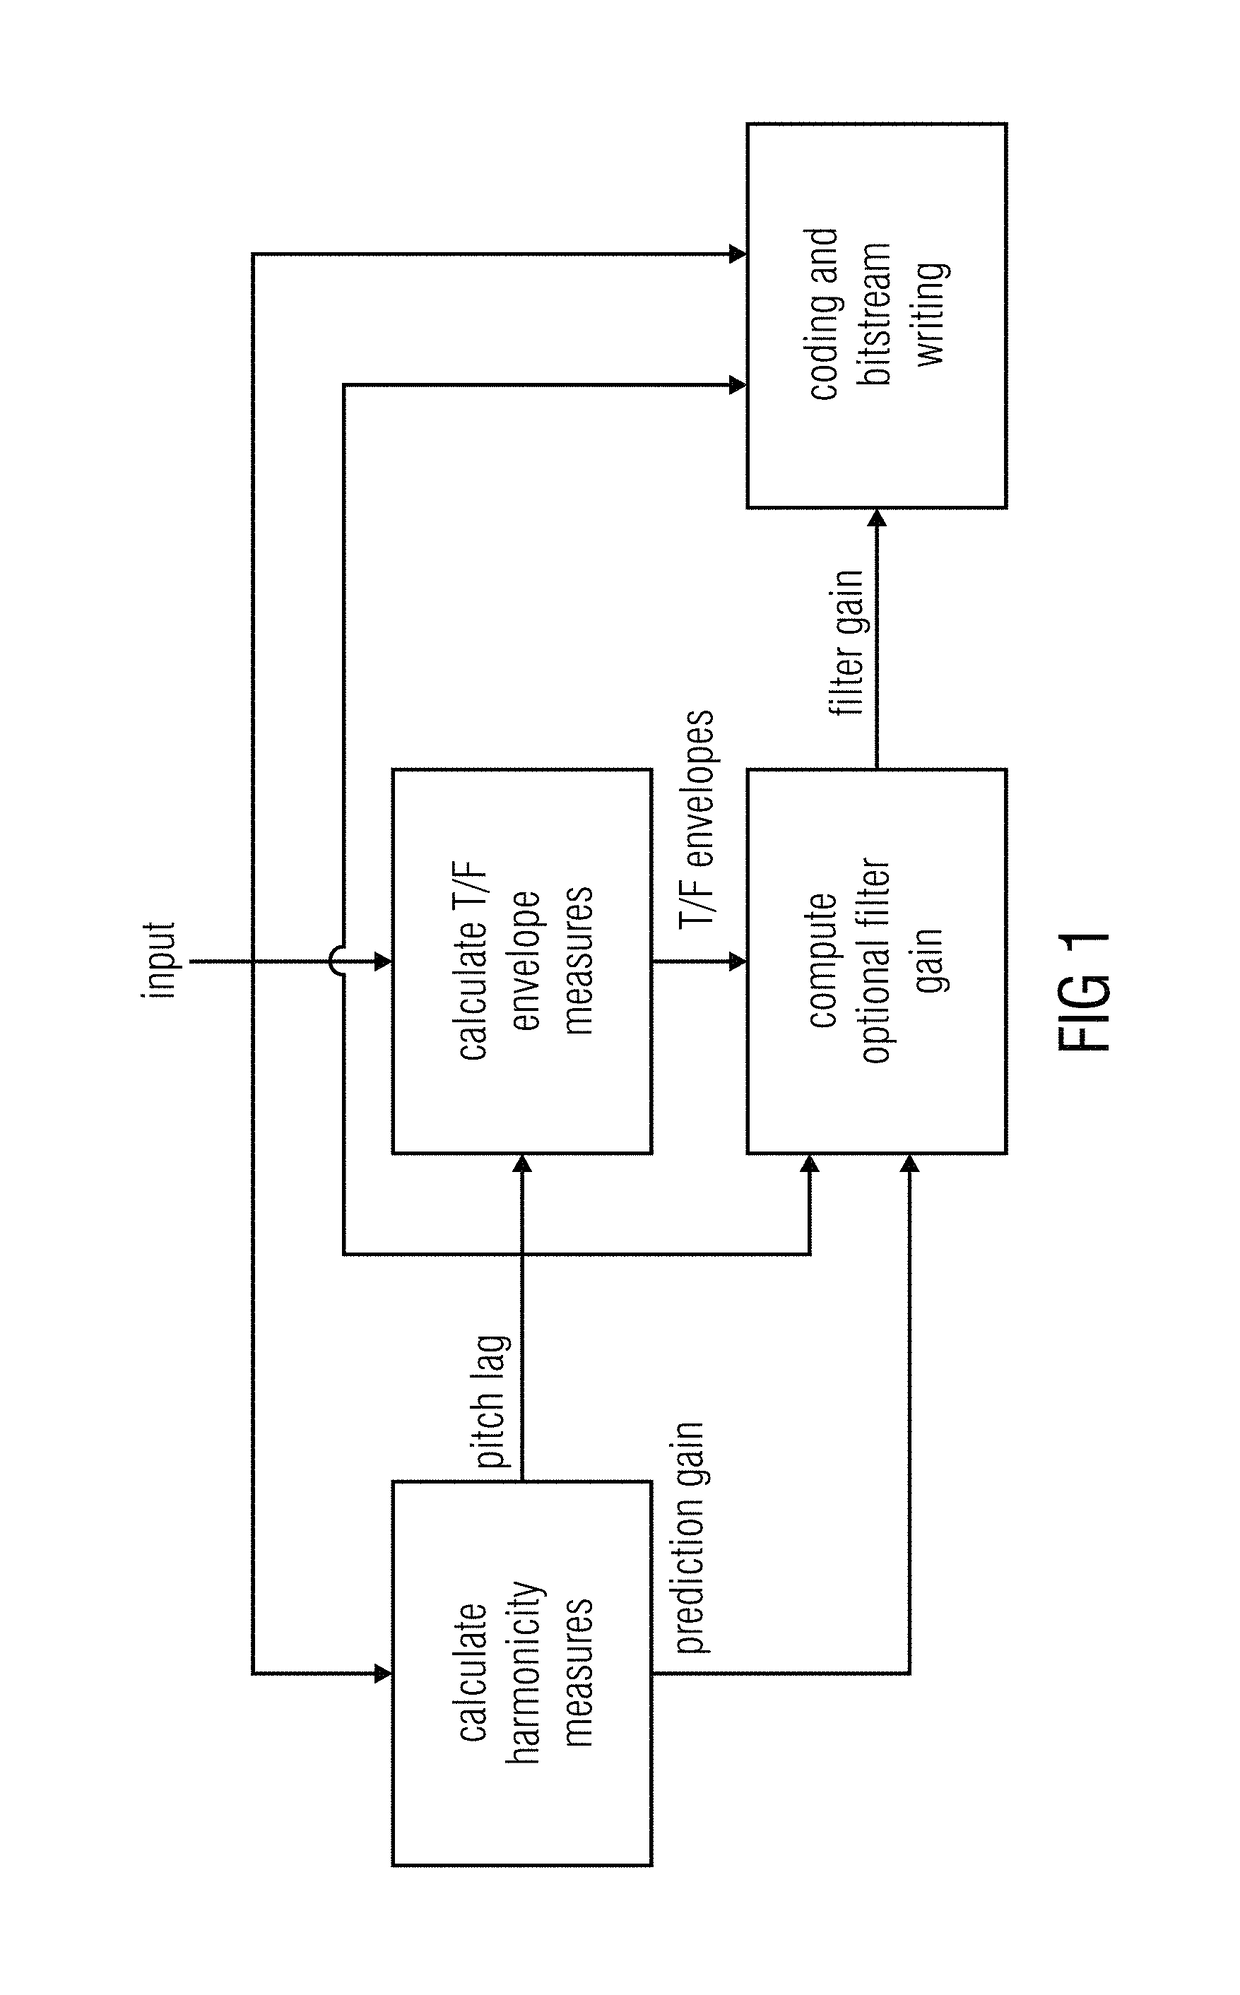 Harmonicity-dependent controlling of a harmonic filter tool